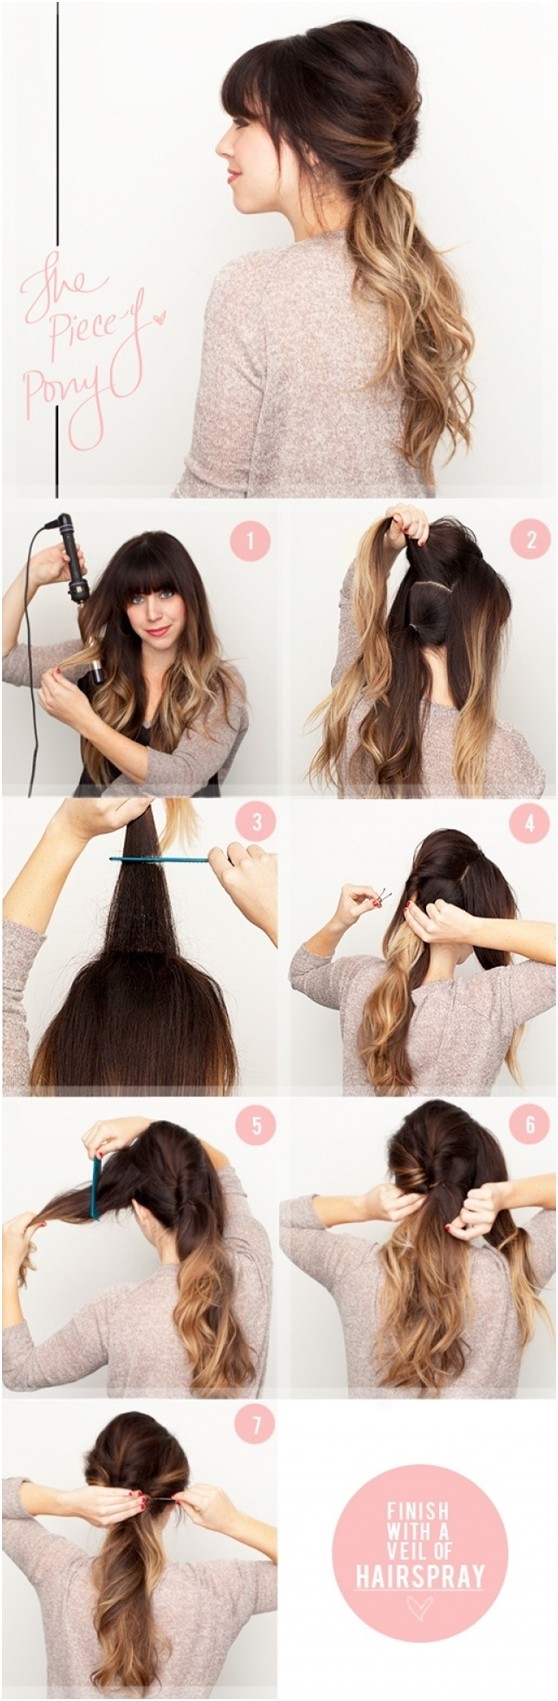 Ombre Ponytail: Cute And Easy Ponytails Hairstyles Tutorials / Via